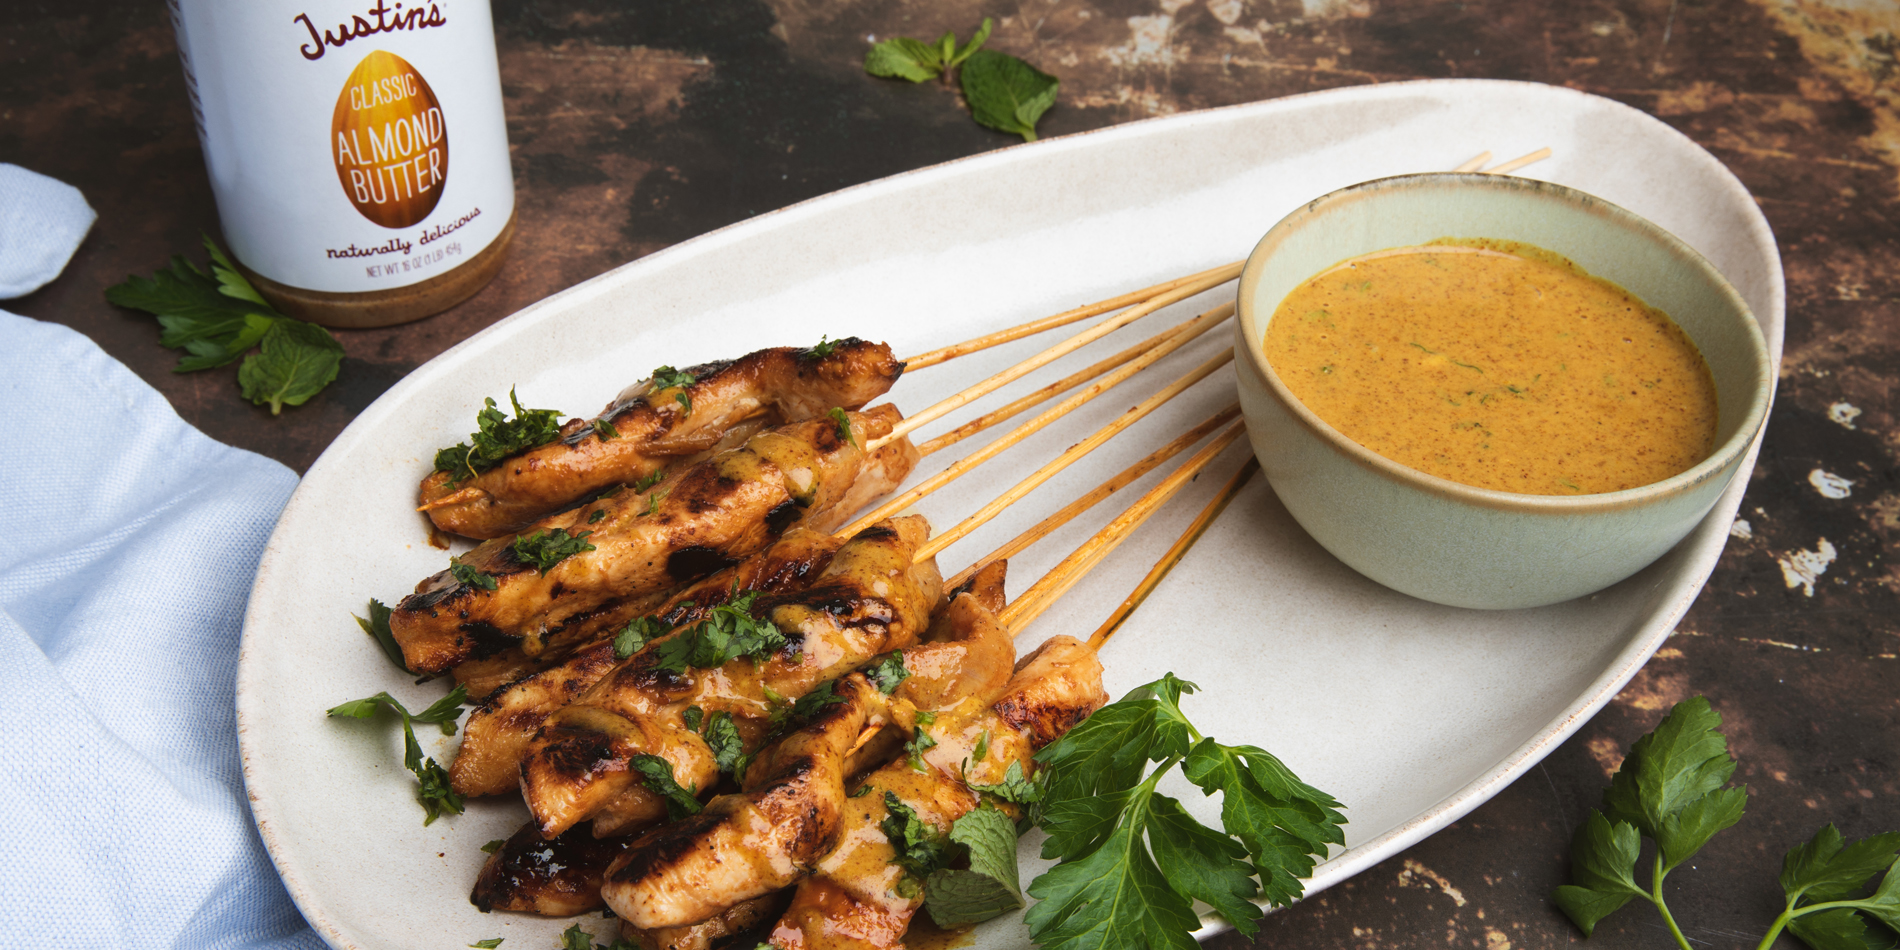 Justins chicken satay with curries almond butter sauce